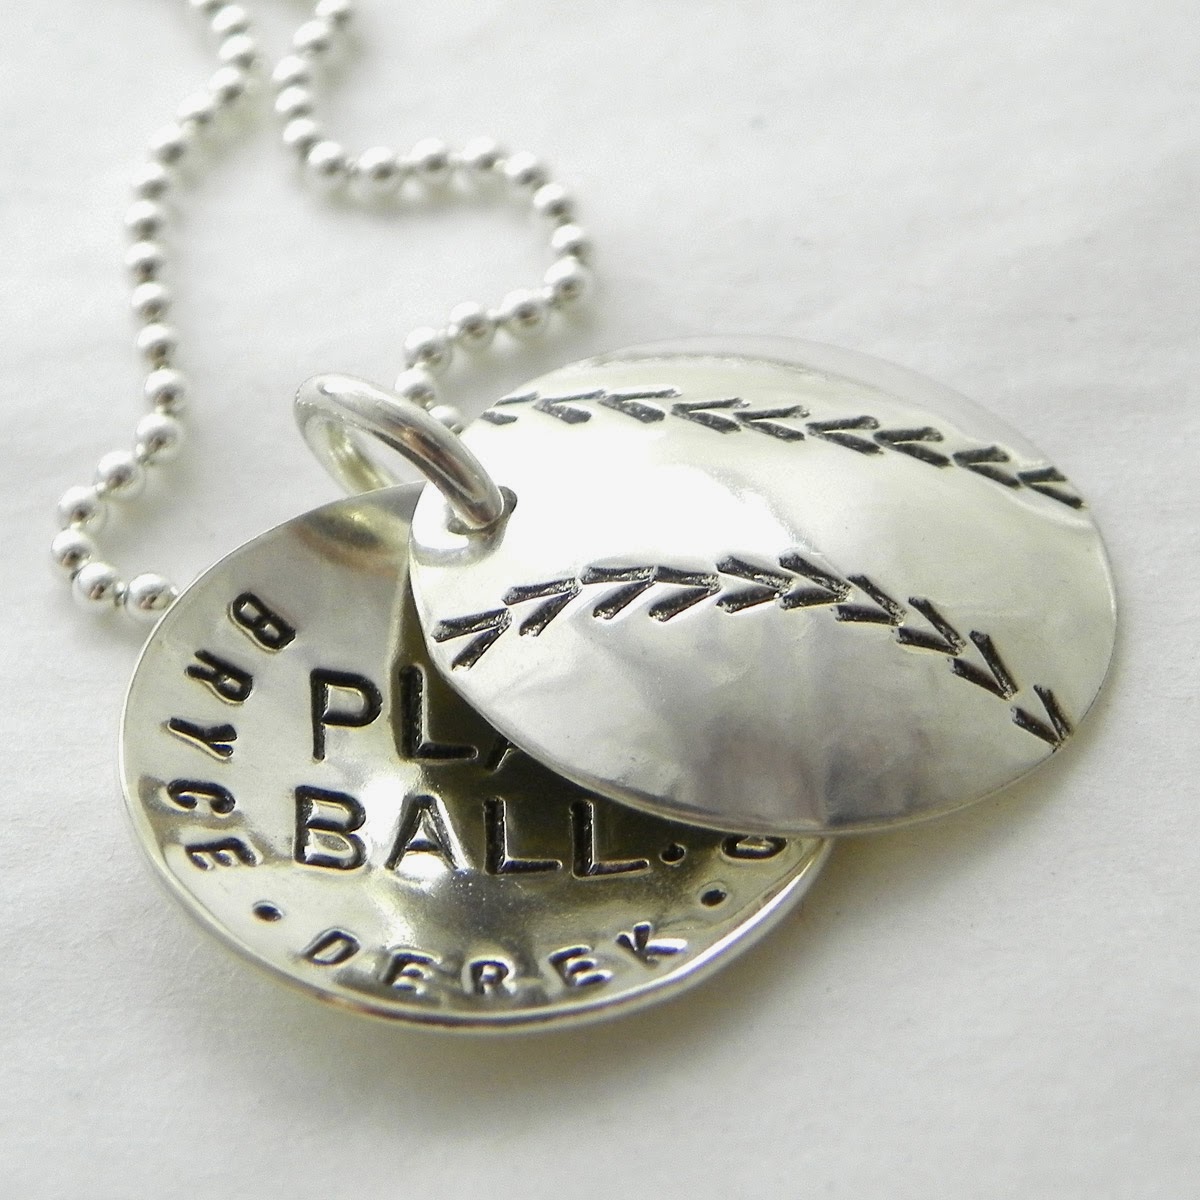 http://shop.punkyjane.com/Baseball-hand-stamped-and-personalized-faux-locket-4514.htm